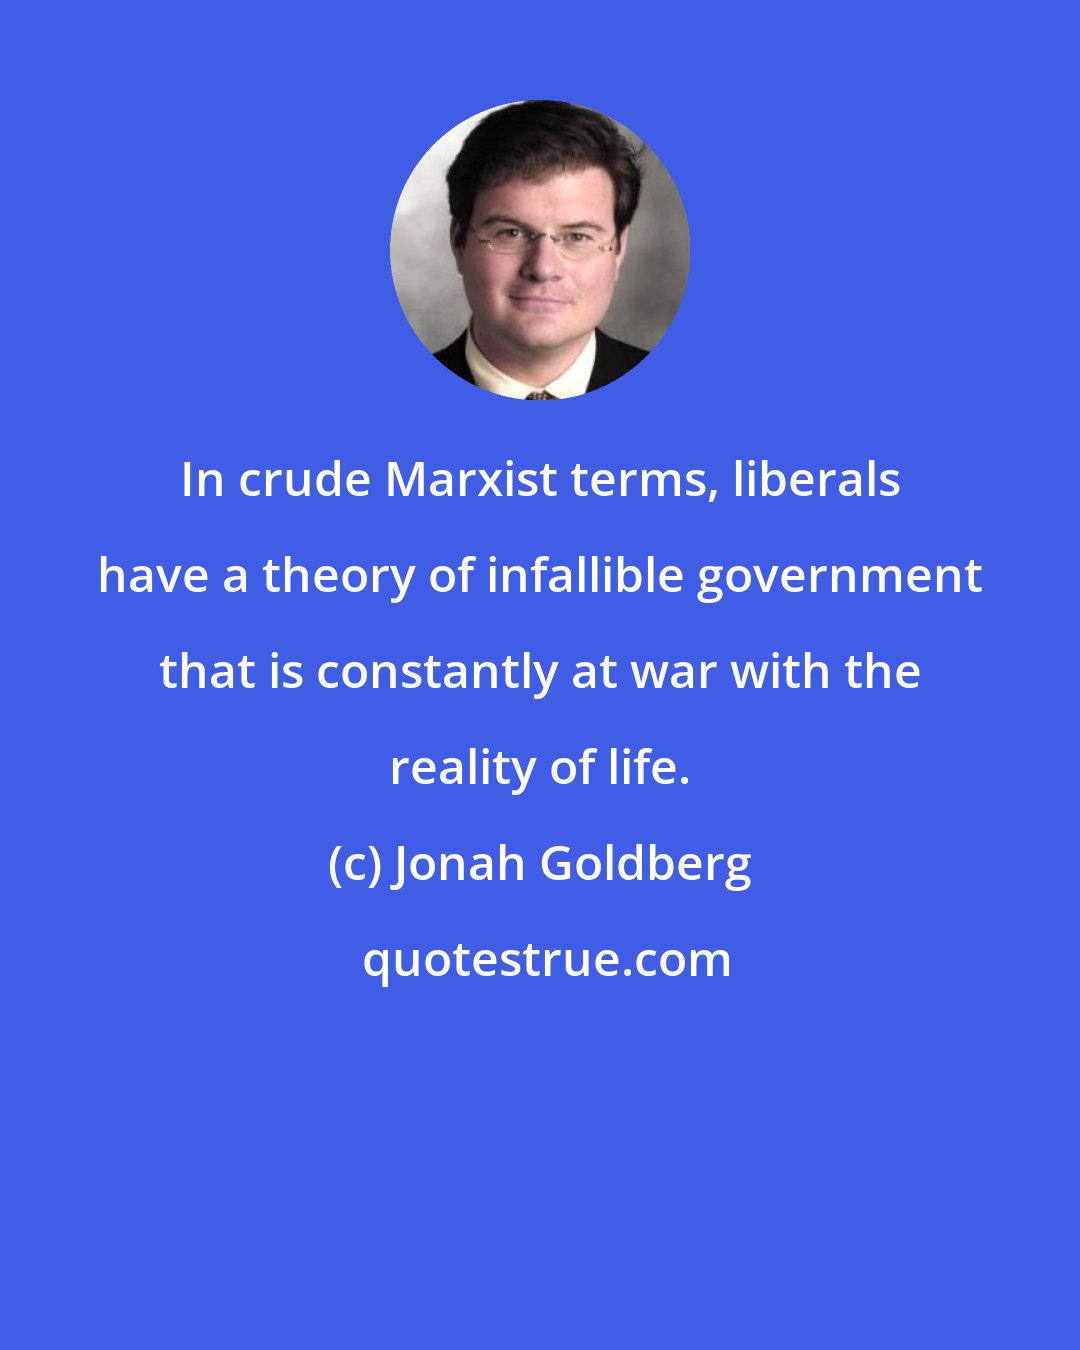 Jonah Goldberg: In crude Marxist terms, liberals have a theory of infallible government that is constantly at war with the reality of life.